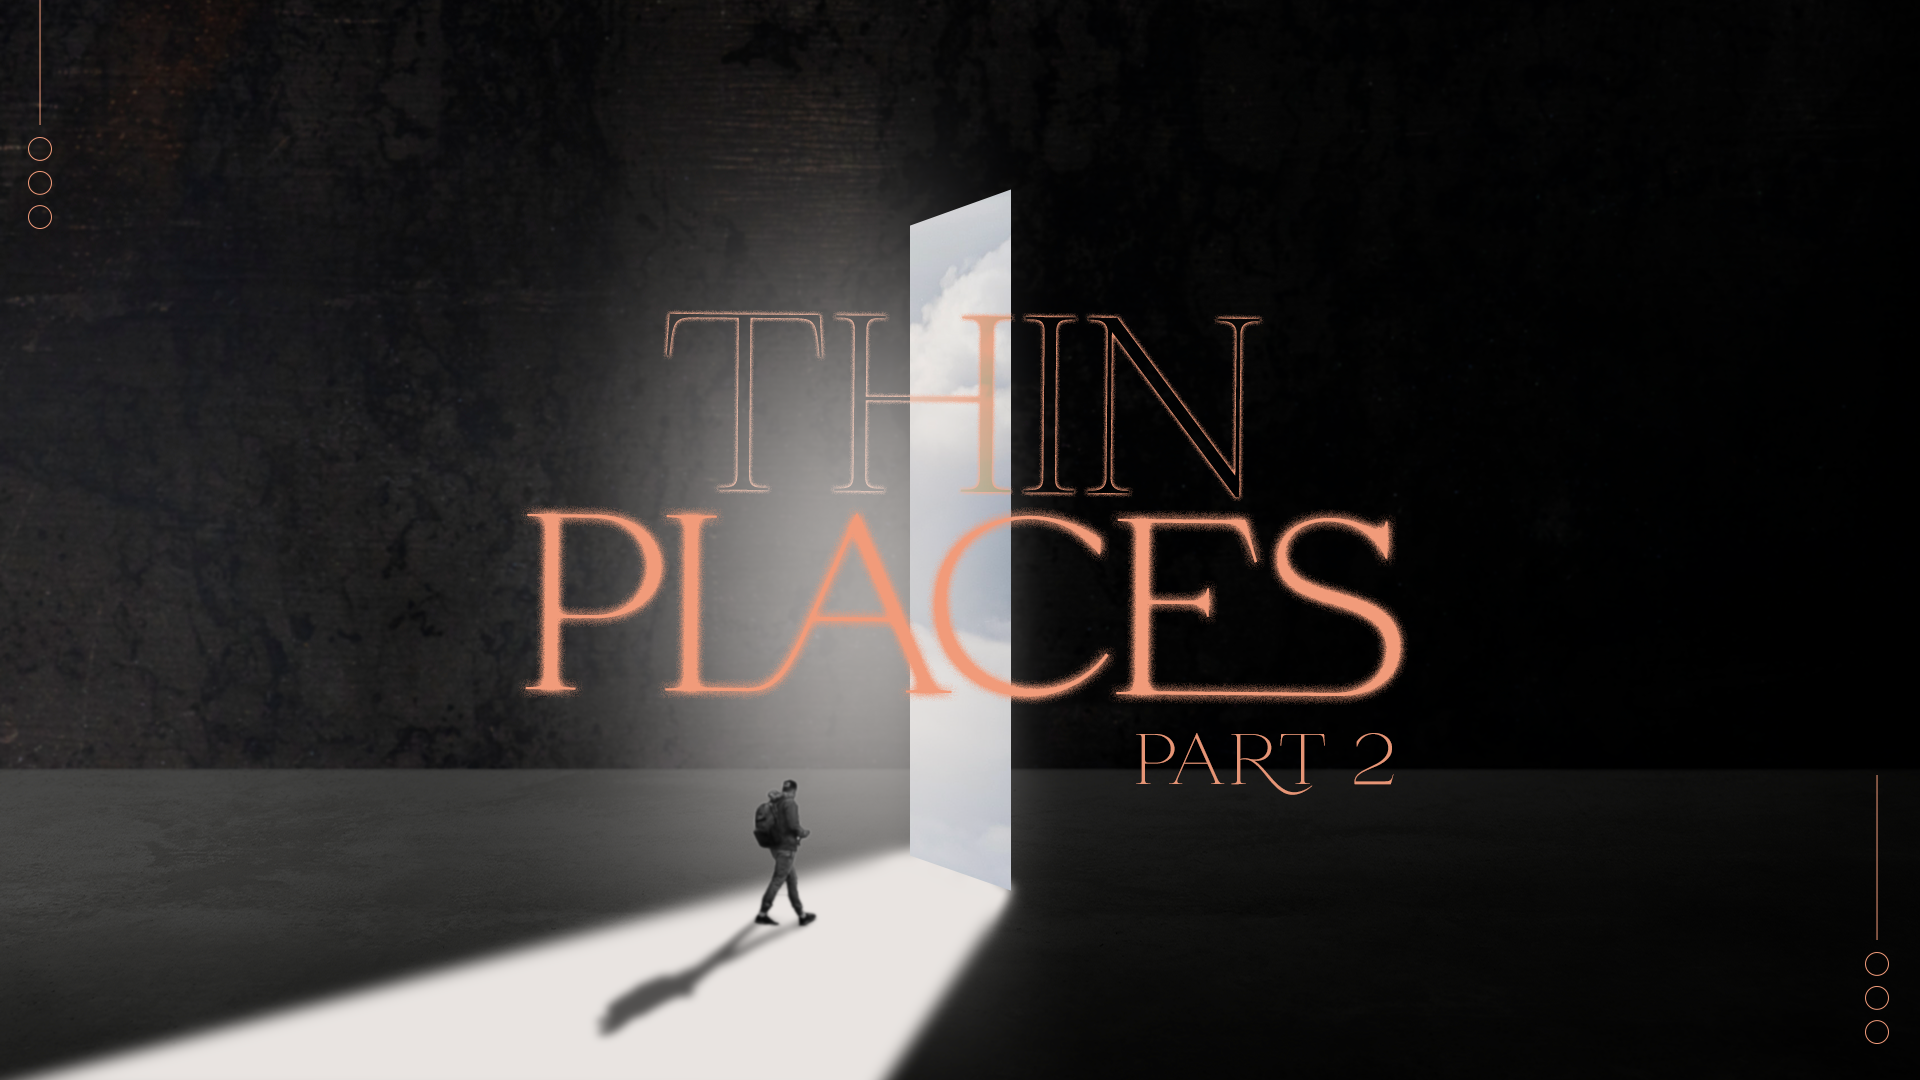 ThinPlaces_1920x1080.png